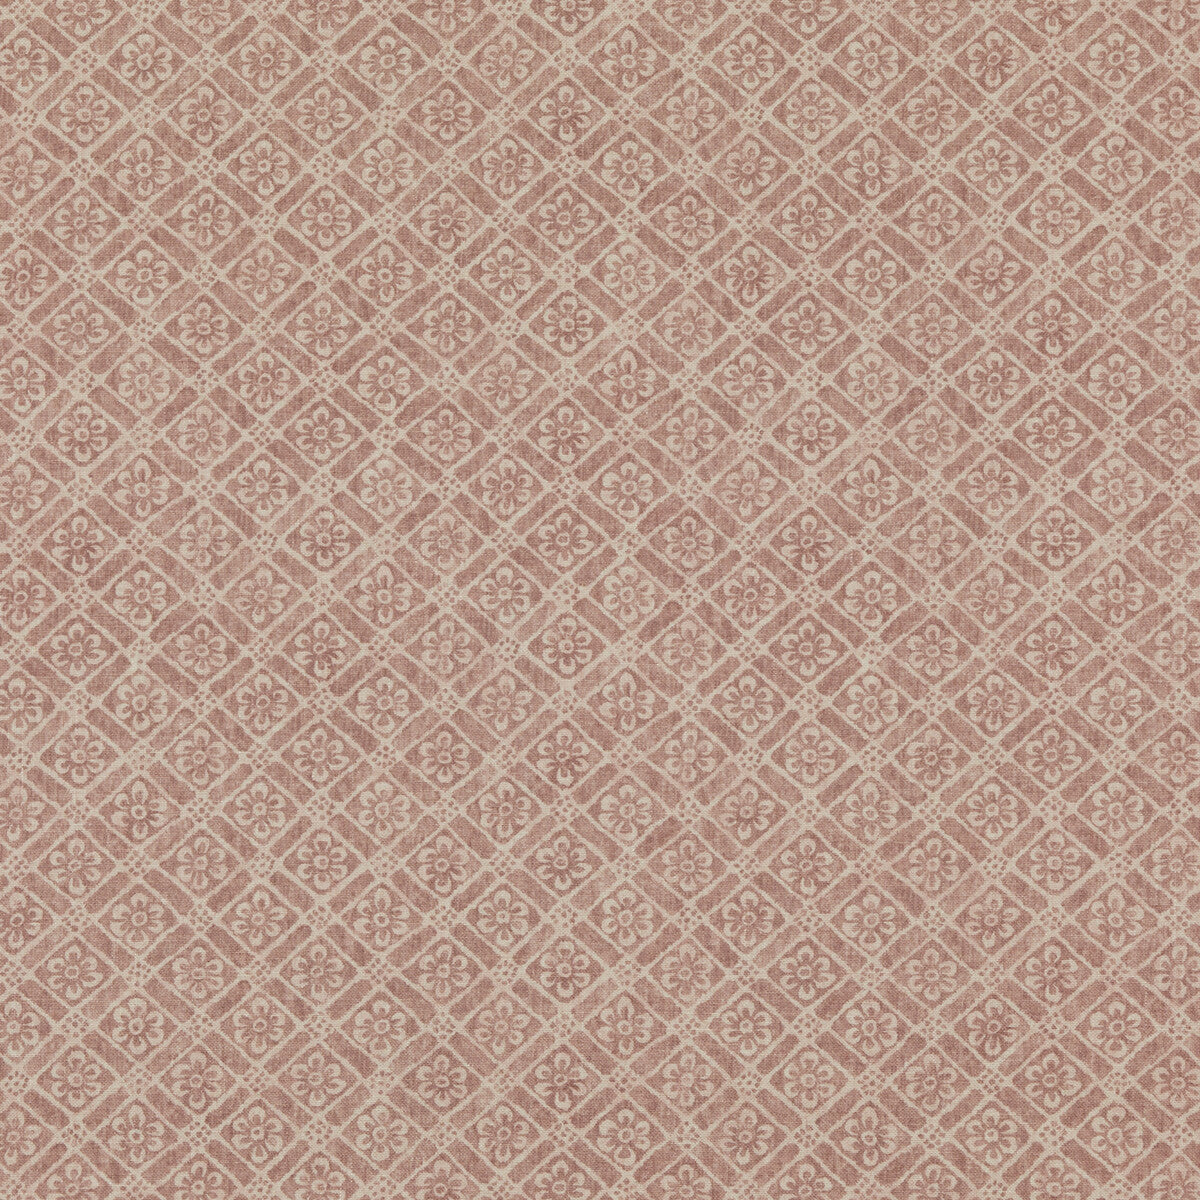 Moreton Trellis fabric in spice color - pattern BP10775.4.0 - by G P &amp; J Baker in the Signature Prints collection